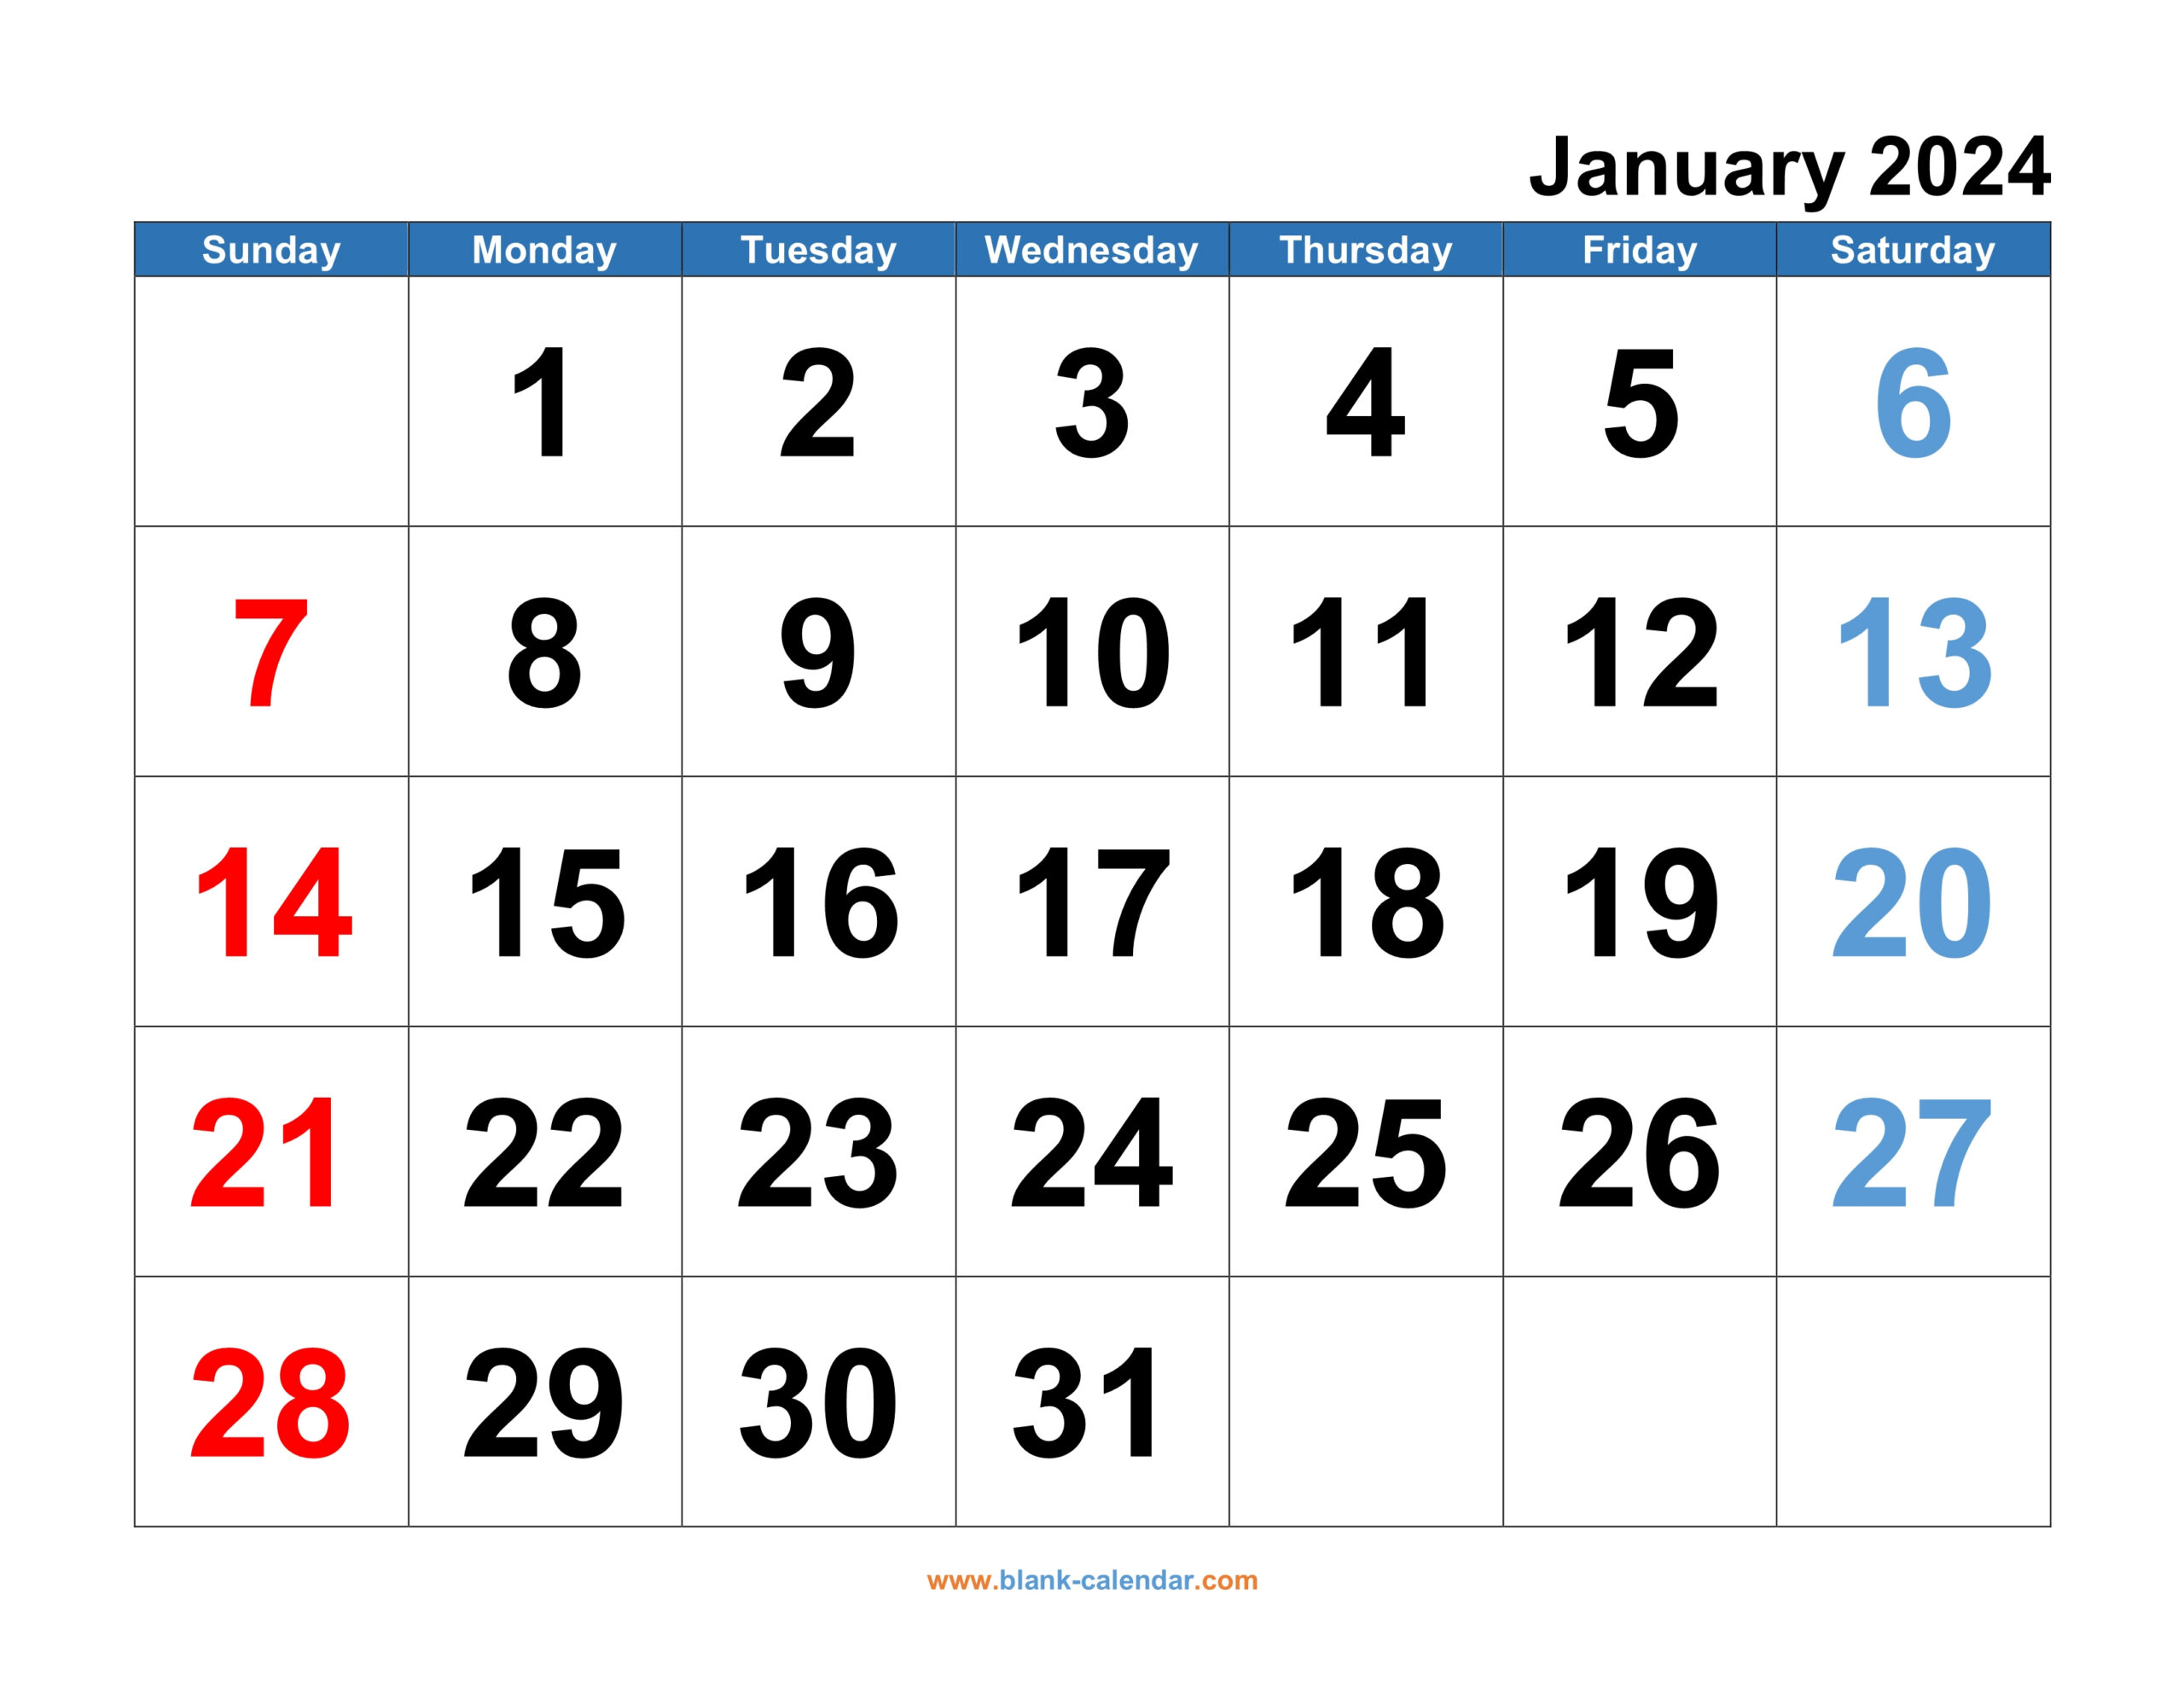 Monthly Calendar 2024 | Free Download, Editable And Printable for Win Printable Calendar 2024